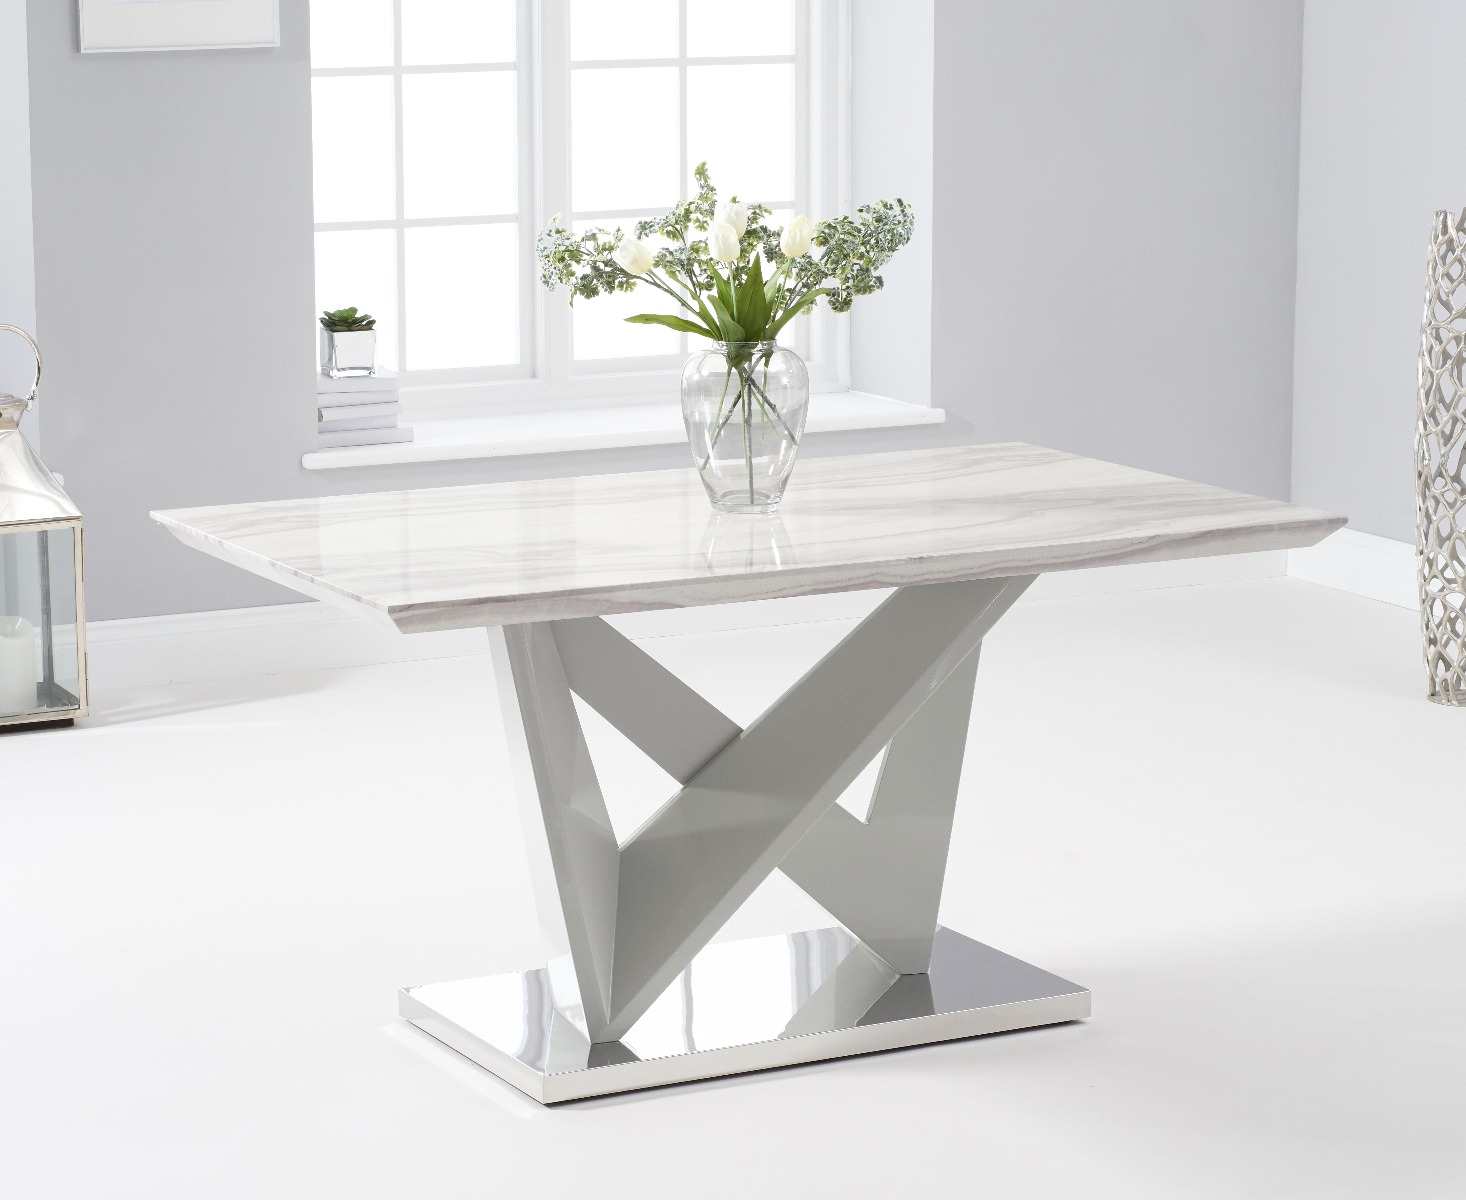 Photo 1 of Reims 150cm marble effect carrera light grey dining table with 6 white aldo chairs